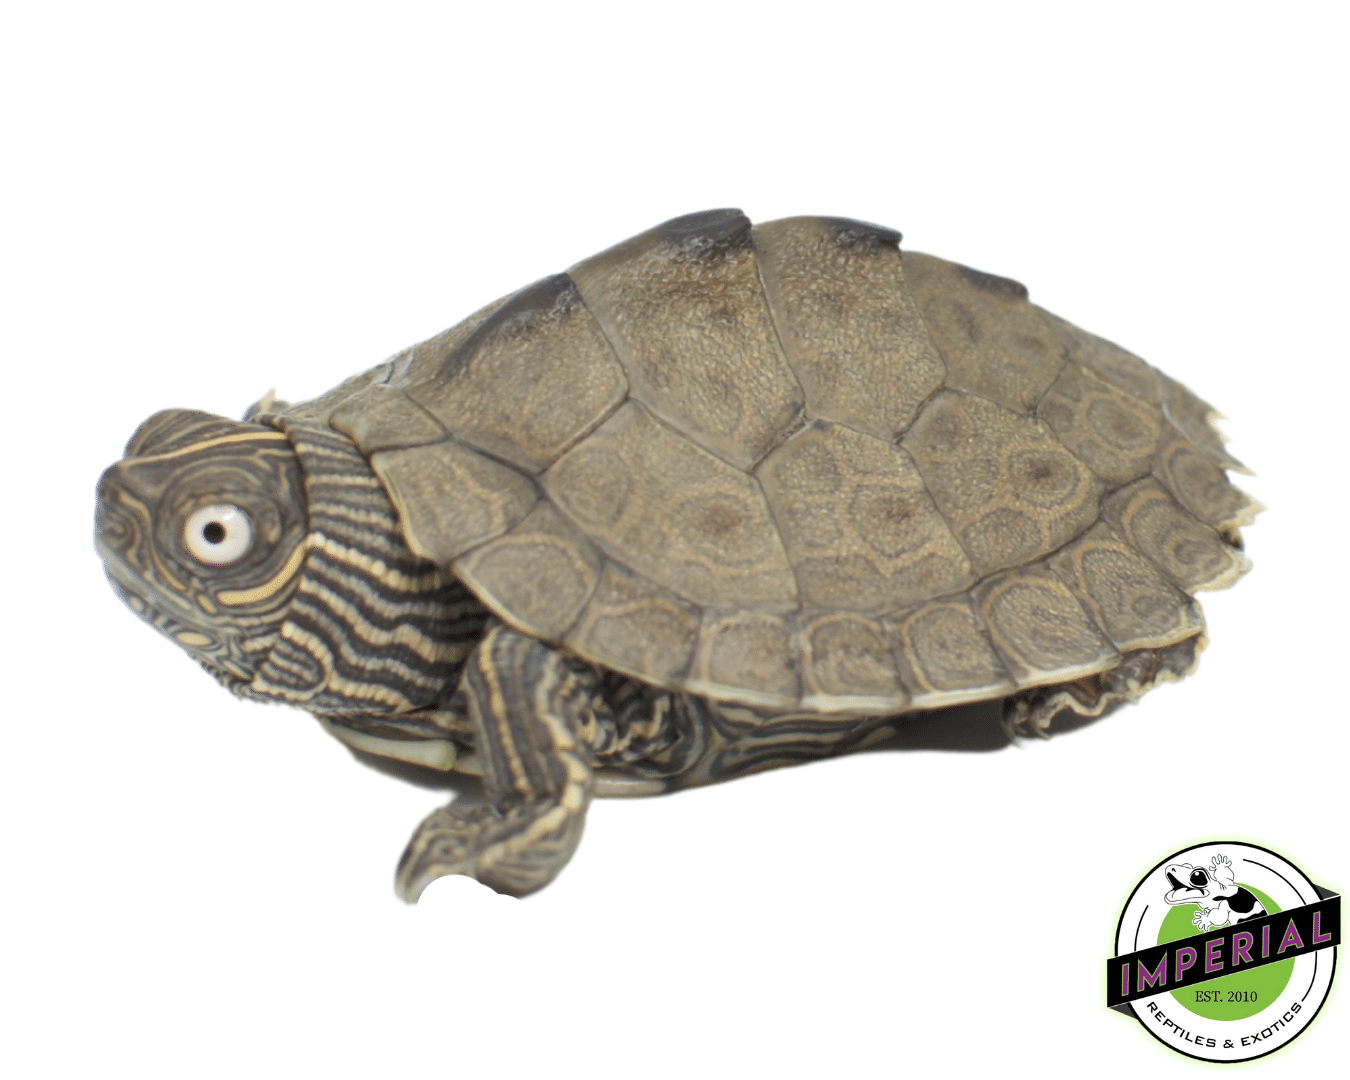 mississippi map turtles for sale, buy turtles online at cheap prices 